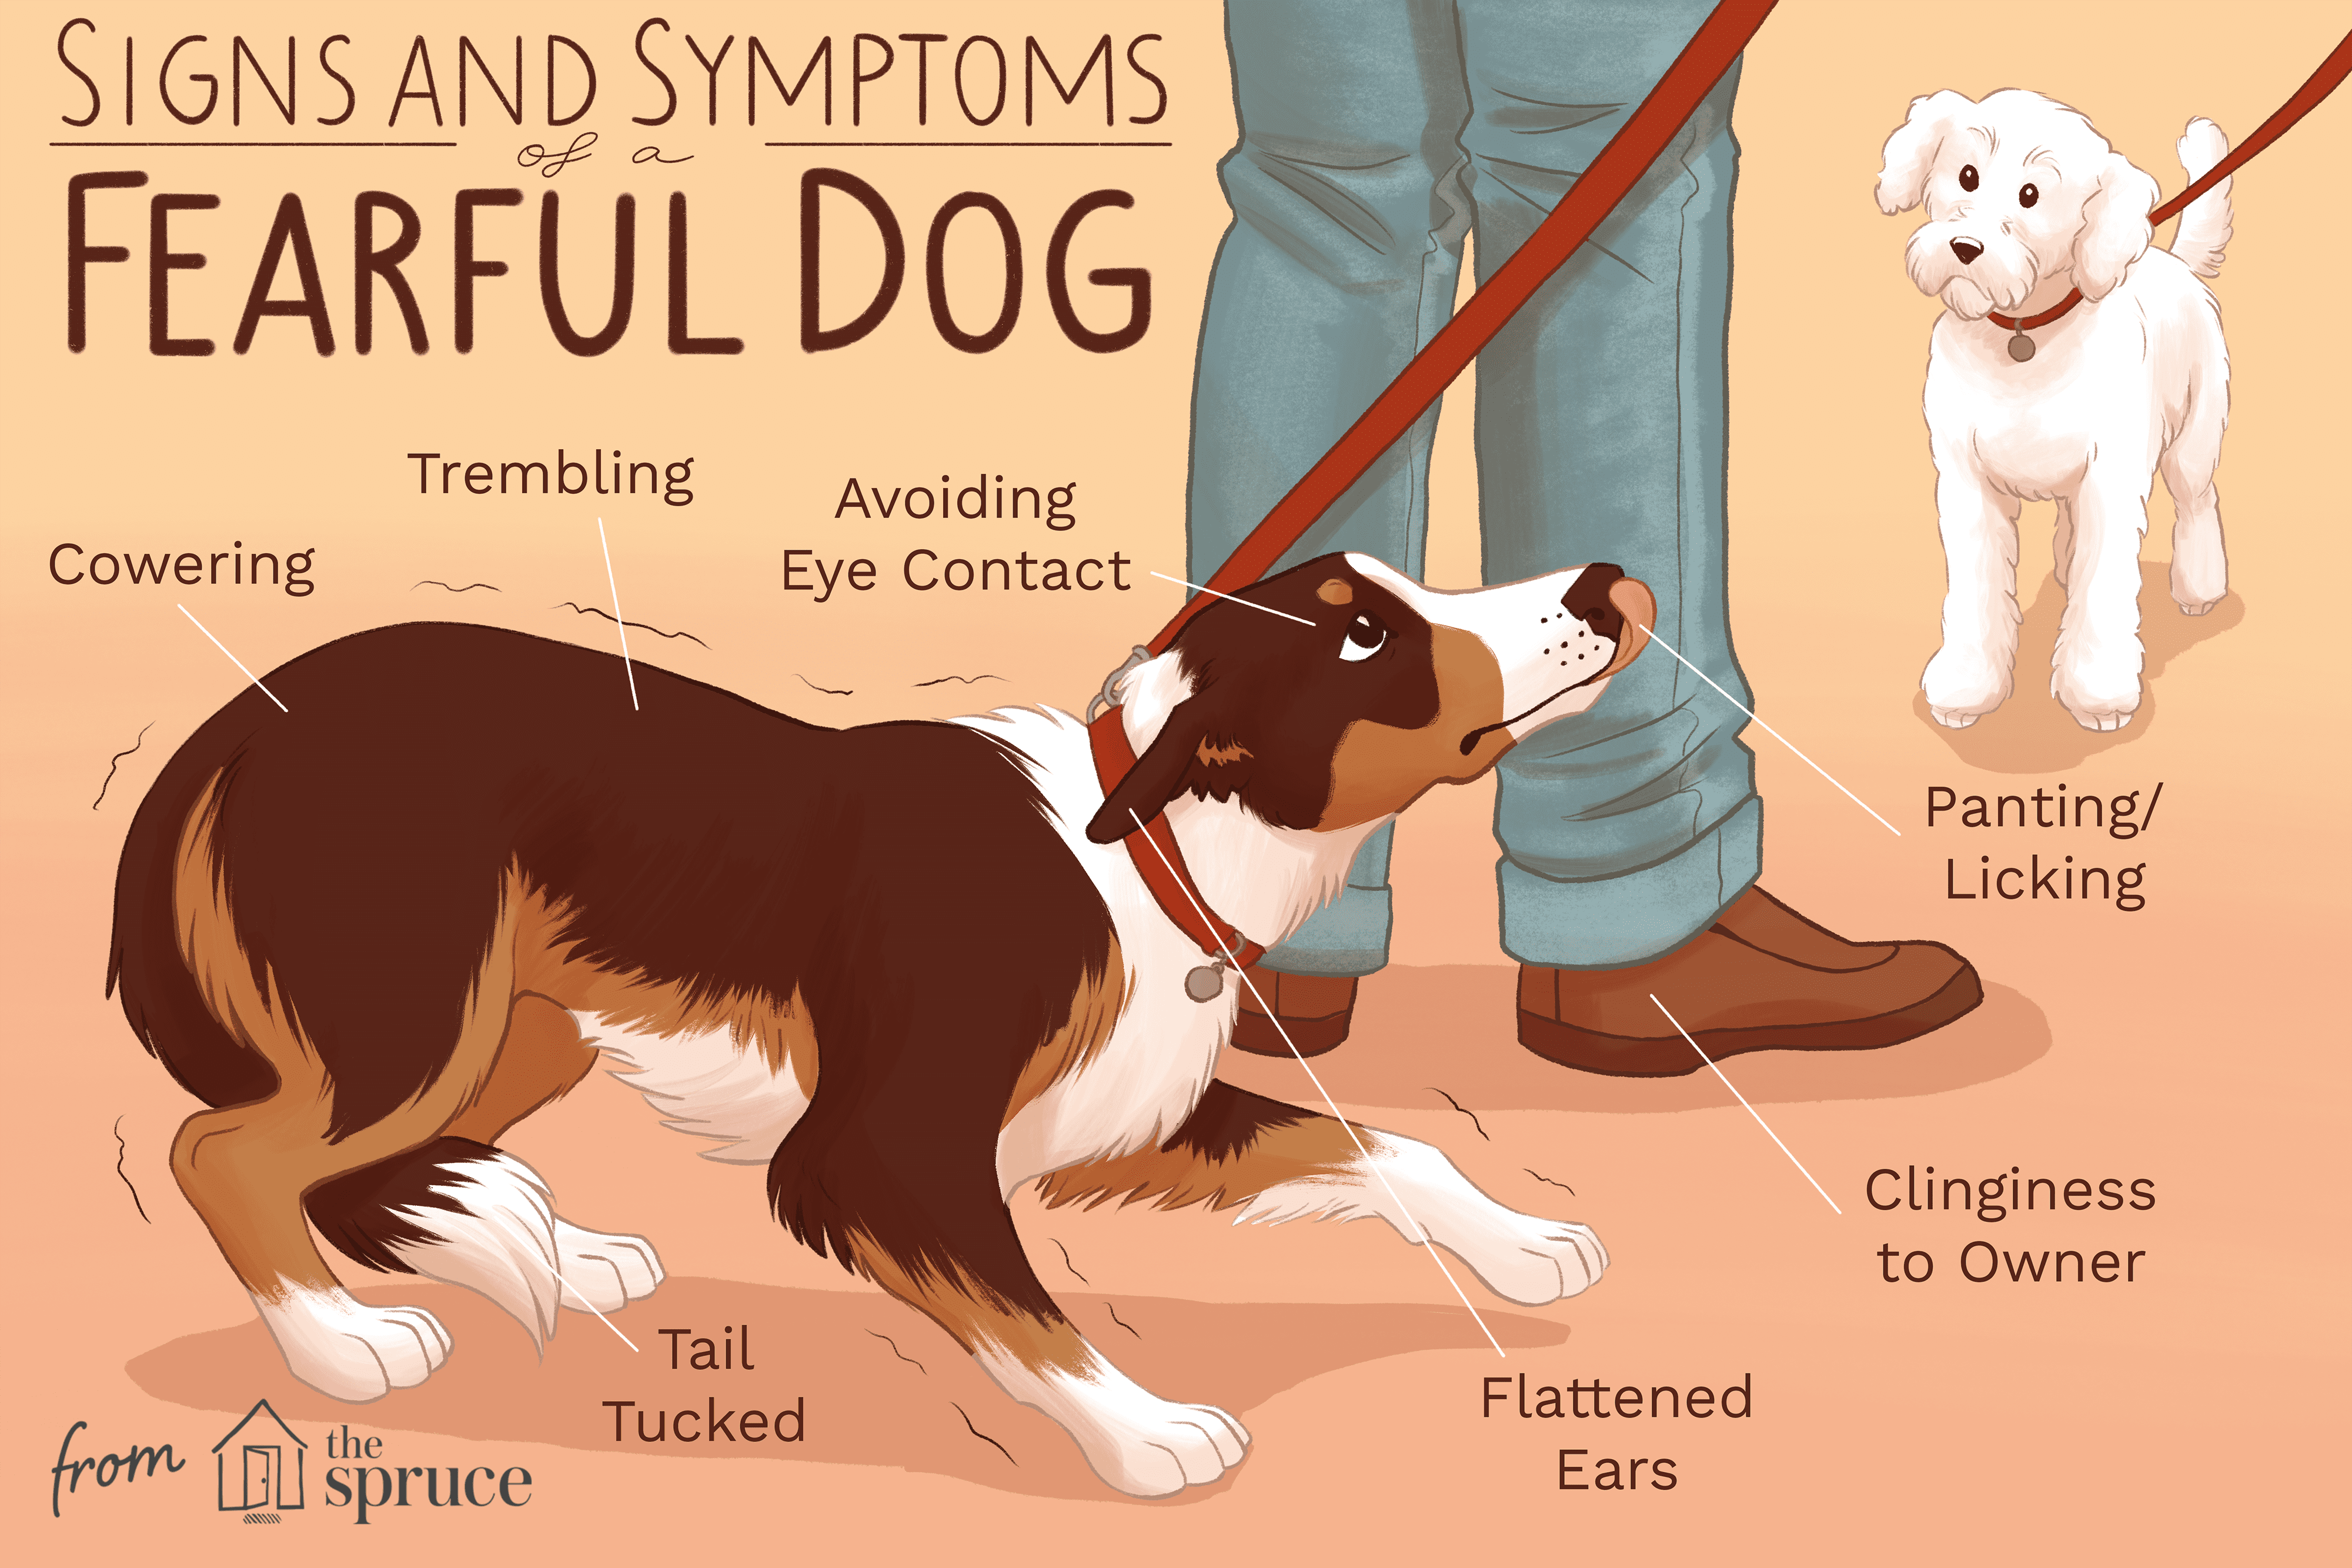 signs and symptoms of a tearful dog illustration